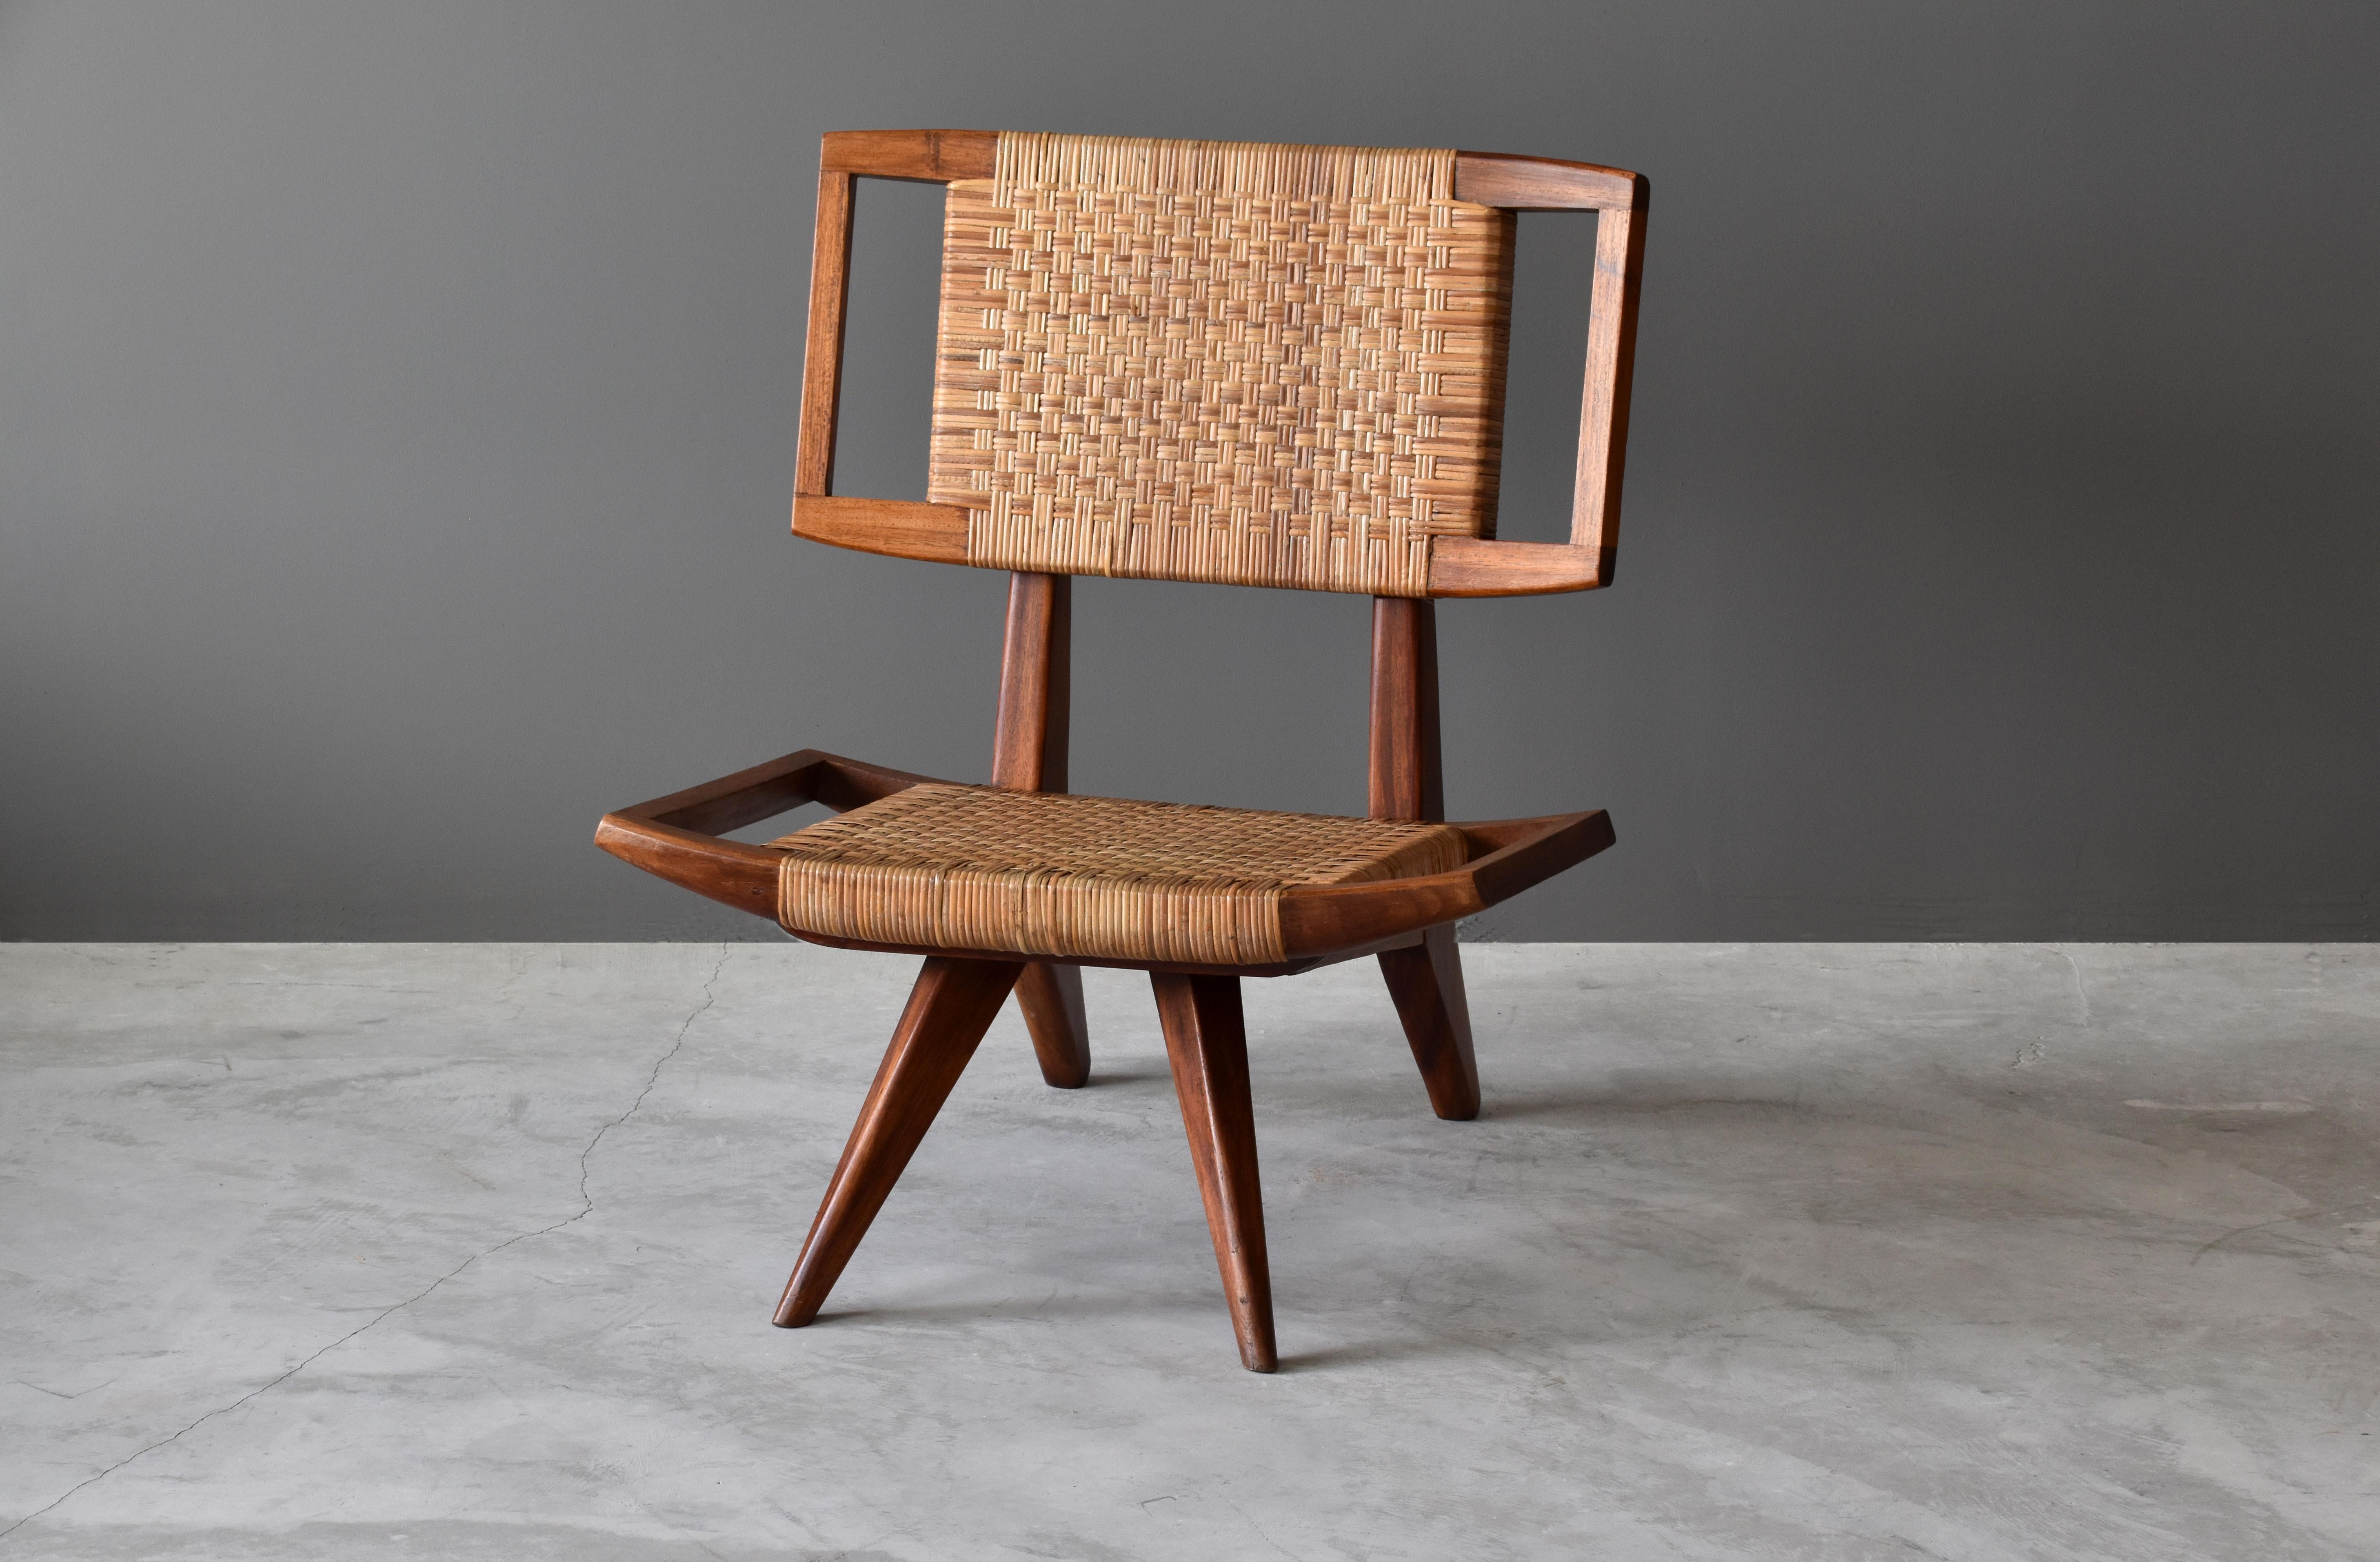 A lounge chair / slipper chair by Paul László for Glenn of California. Dark stained mahogany and original woven rattan / cane seat and back.

Paul László is considered among the most important California-based interior designer/architects of all